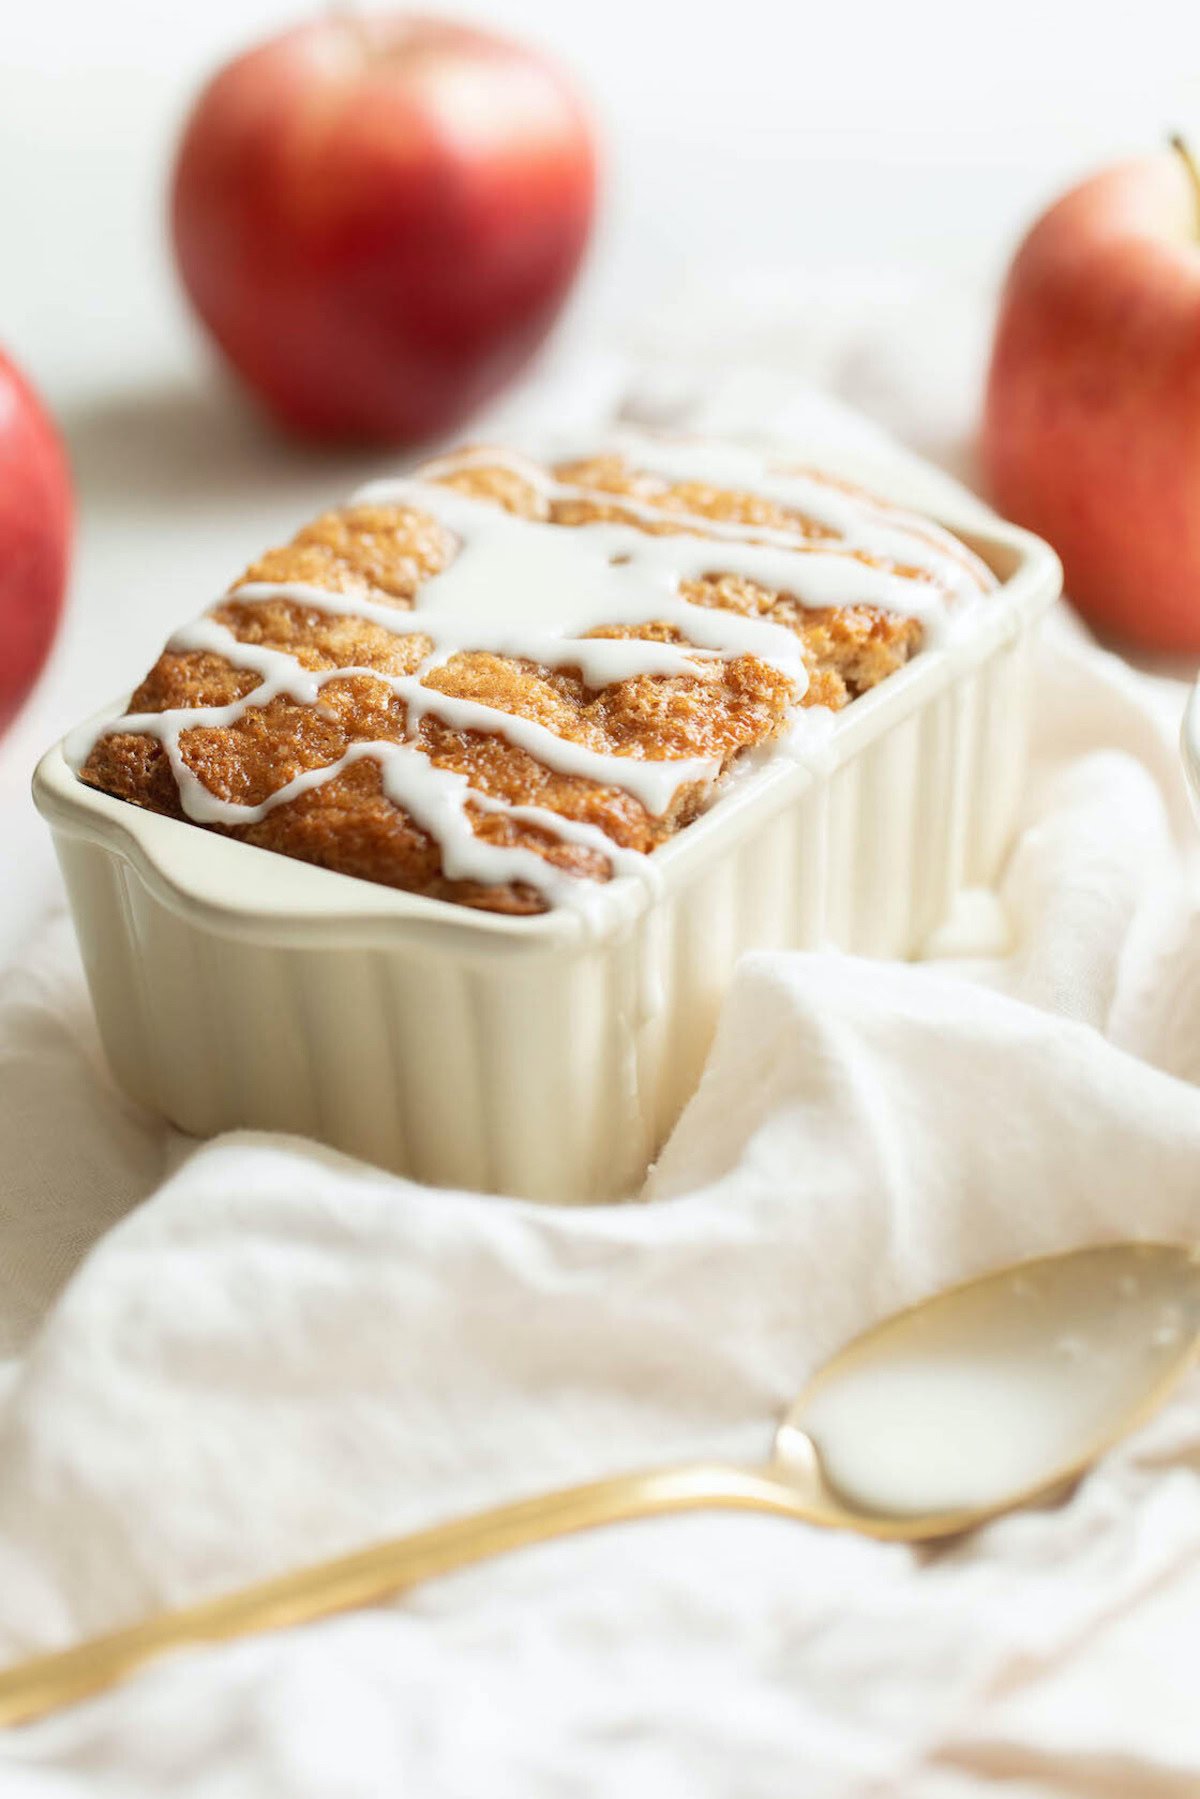 A glazed apple bread recipe in a rectangular baking dish is set against a white cloth, with two apples and a spoon nearby.